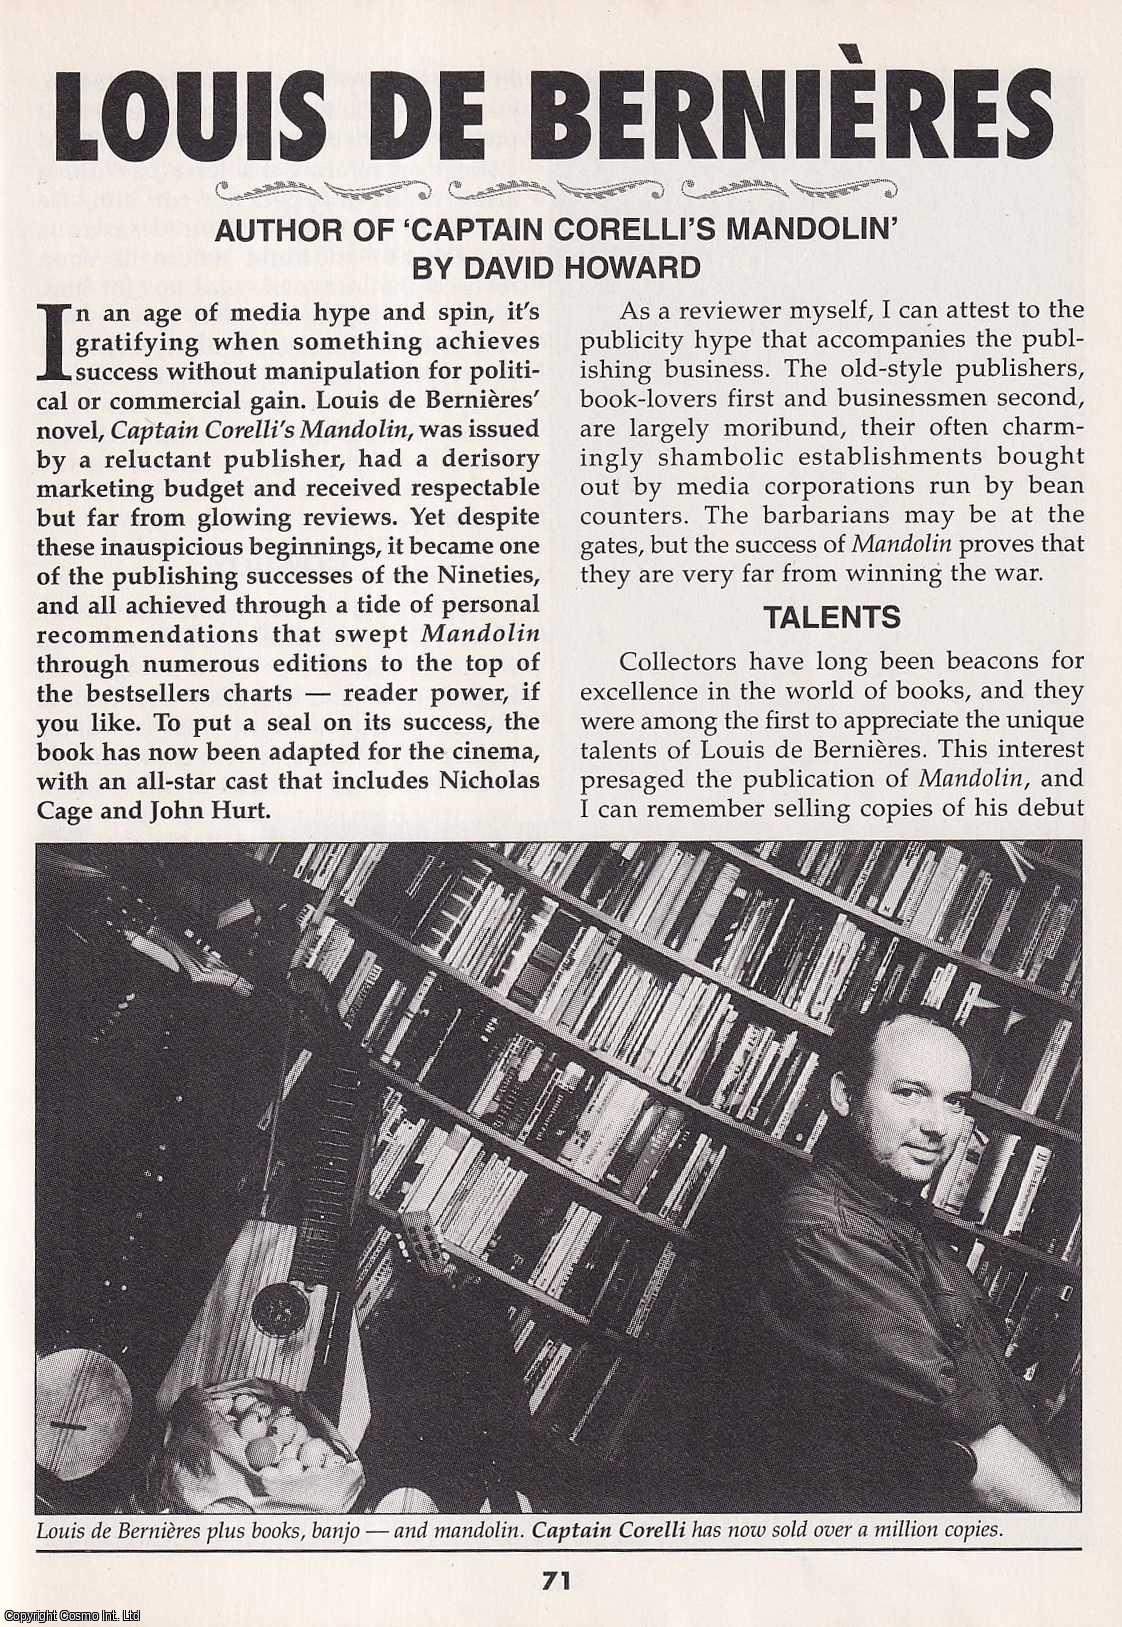 David Howard - Louis De Bernieres. Author of Captain Corelli's Mandolin. This is an original article separated from an issue of The Book & Magazine Collector publication, 2001.